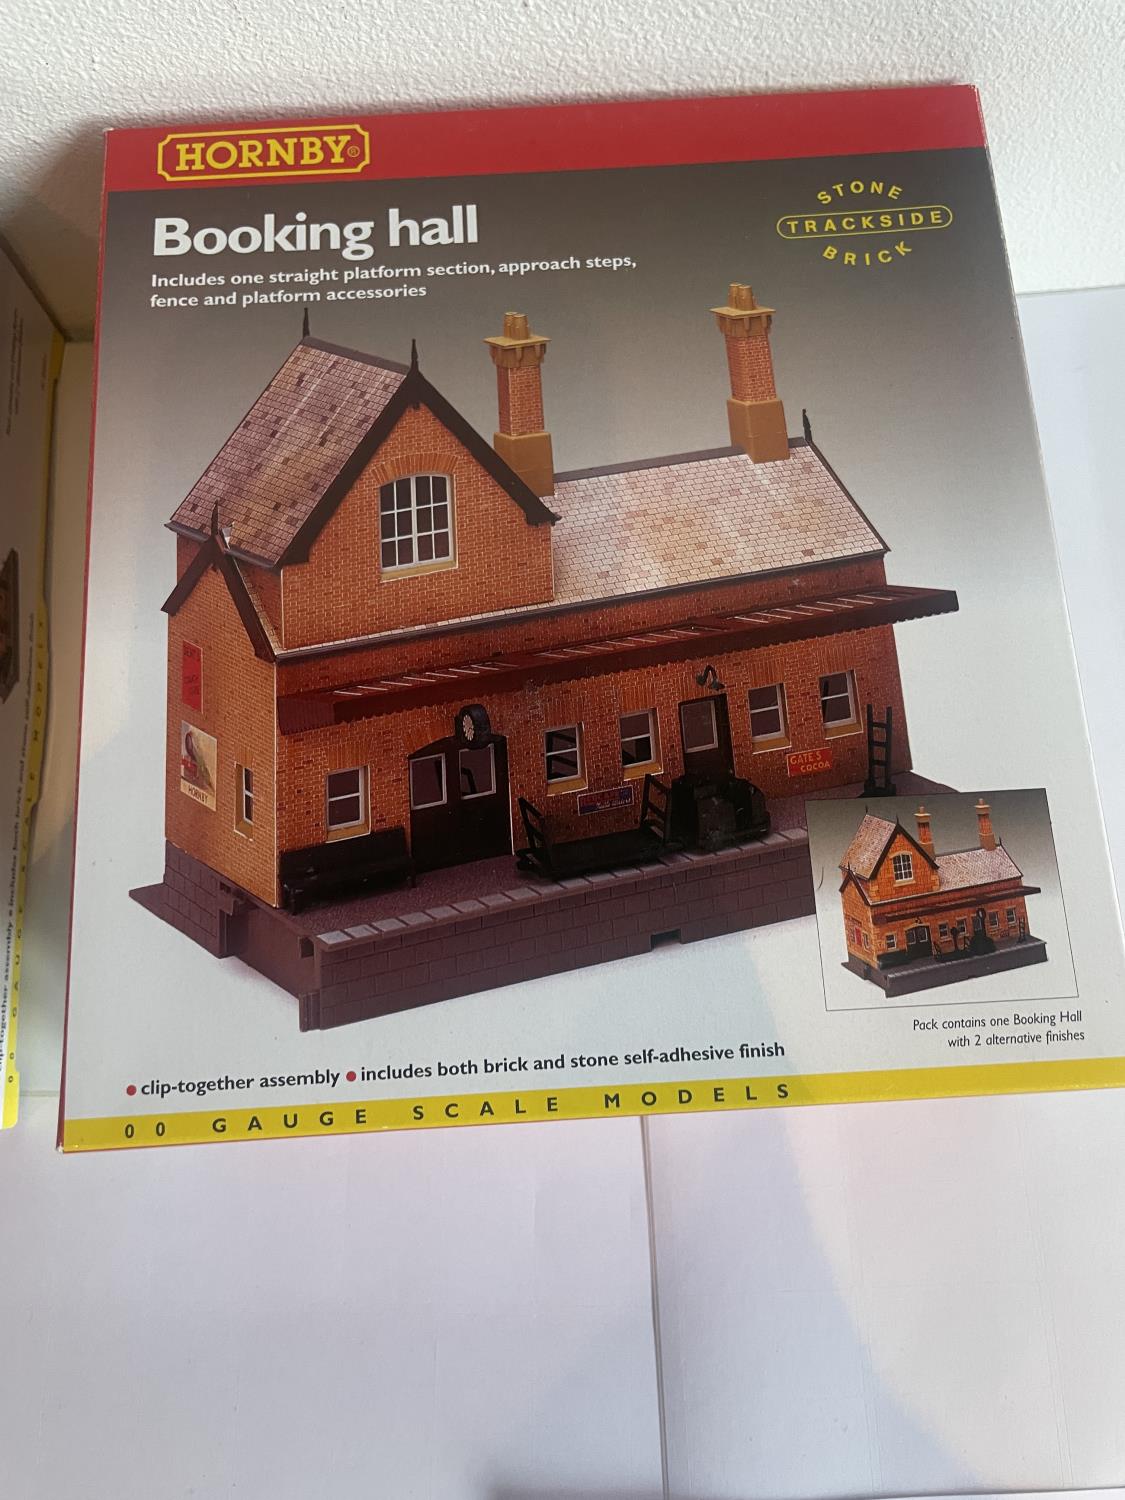 TWO AS NEW AND BOXED HORNBY 00 GAUGE RAILWAY MODELS TO INCLUDE A BOOKING HALLA AND A WAITING ROOM - Image 3 of 3